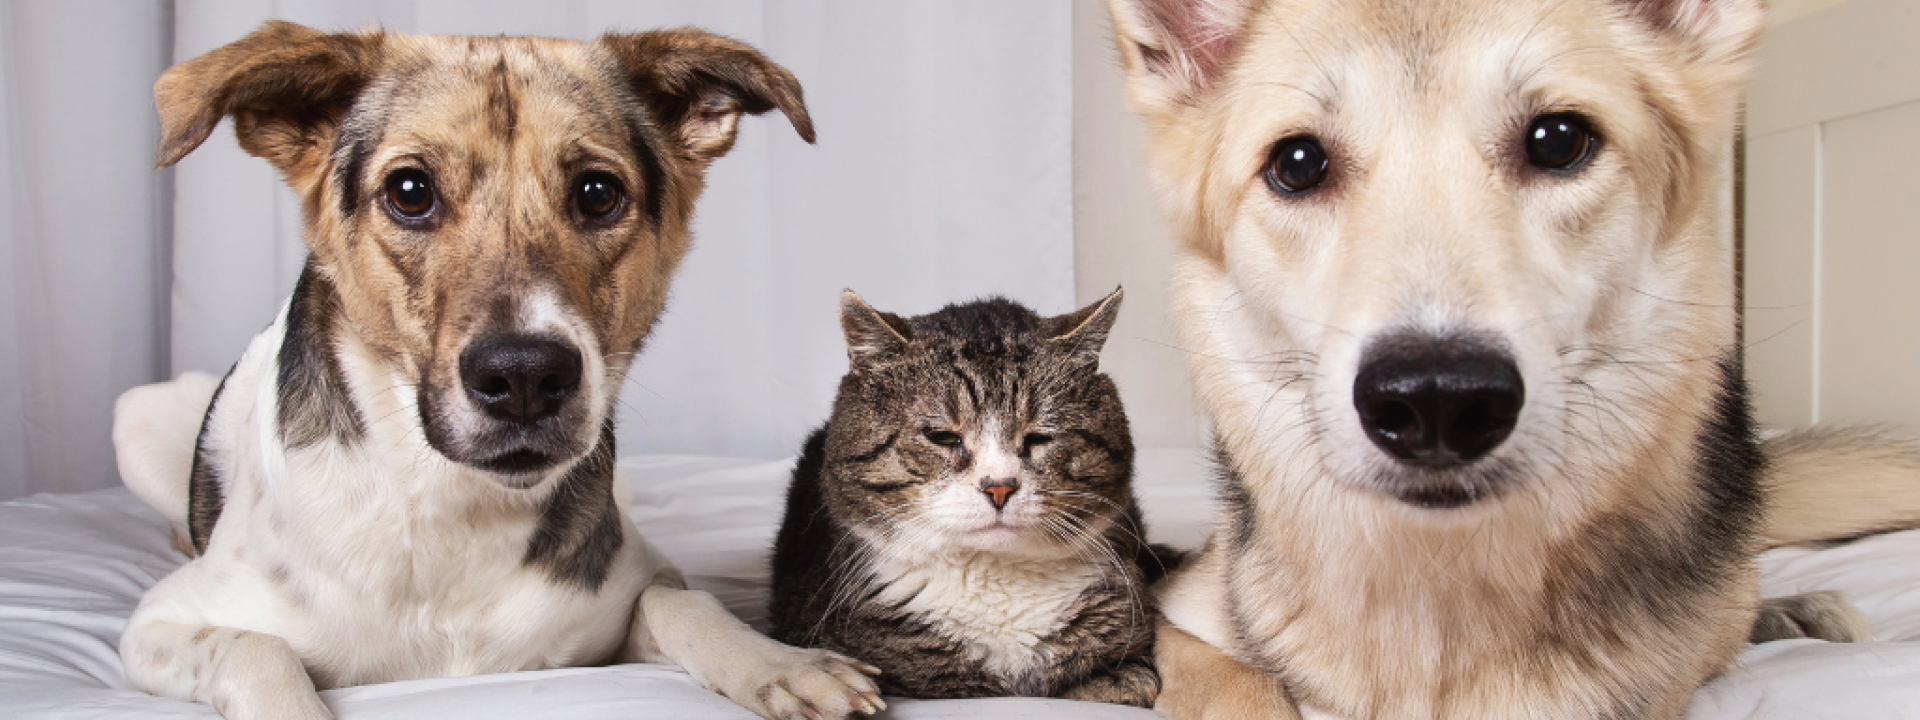 Senior Dogs and Cat on bed